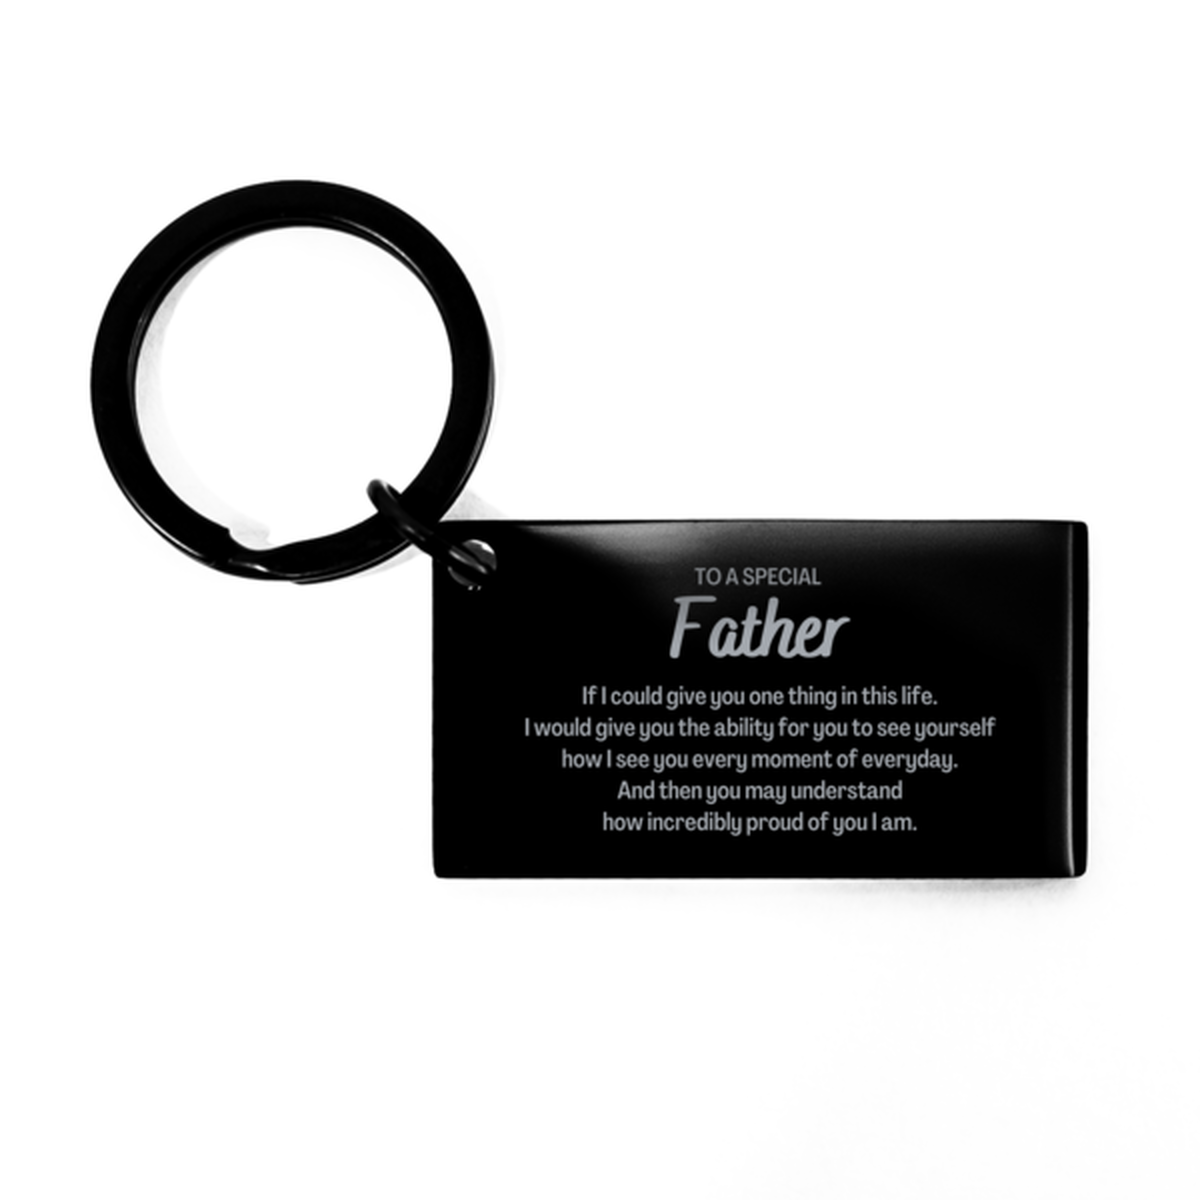 To My Father Keychain, Gifts For Father Engraved, Inspirational Gifts for Christmas Birthday, Epic Gifts for Father To A Special Father how incredibly proud of you I am